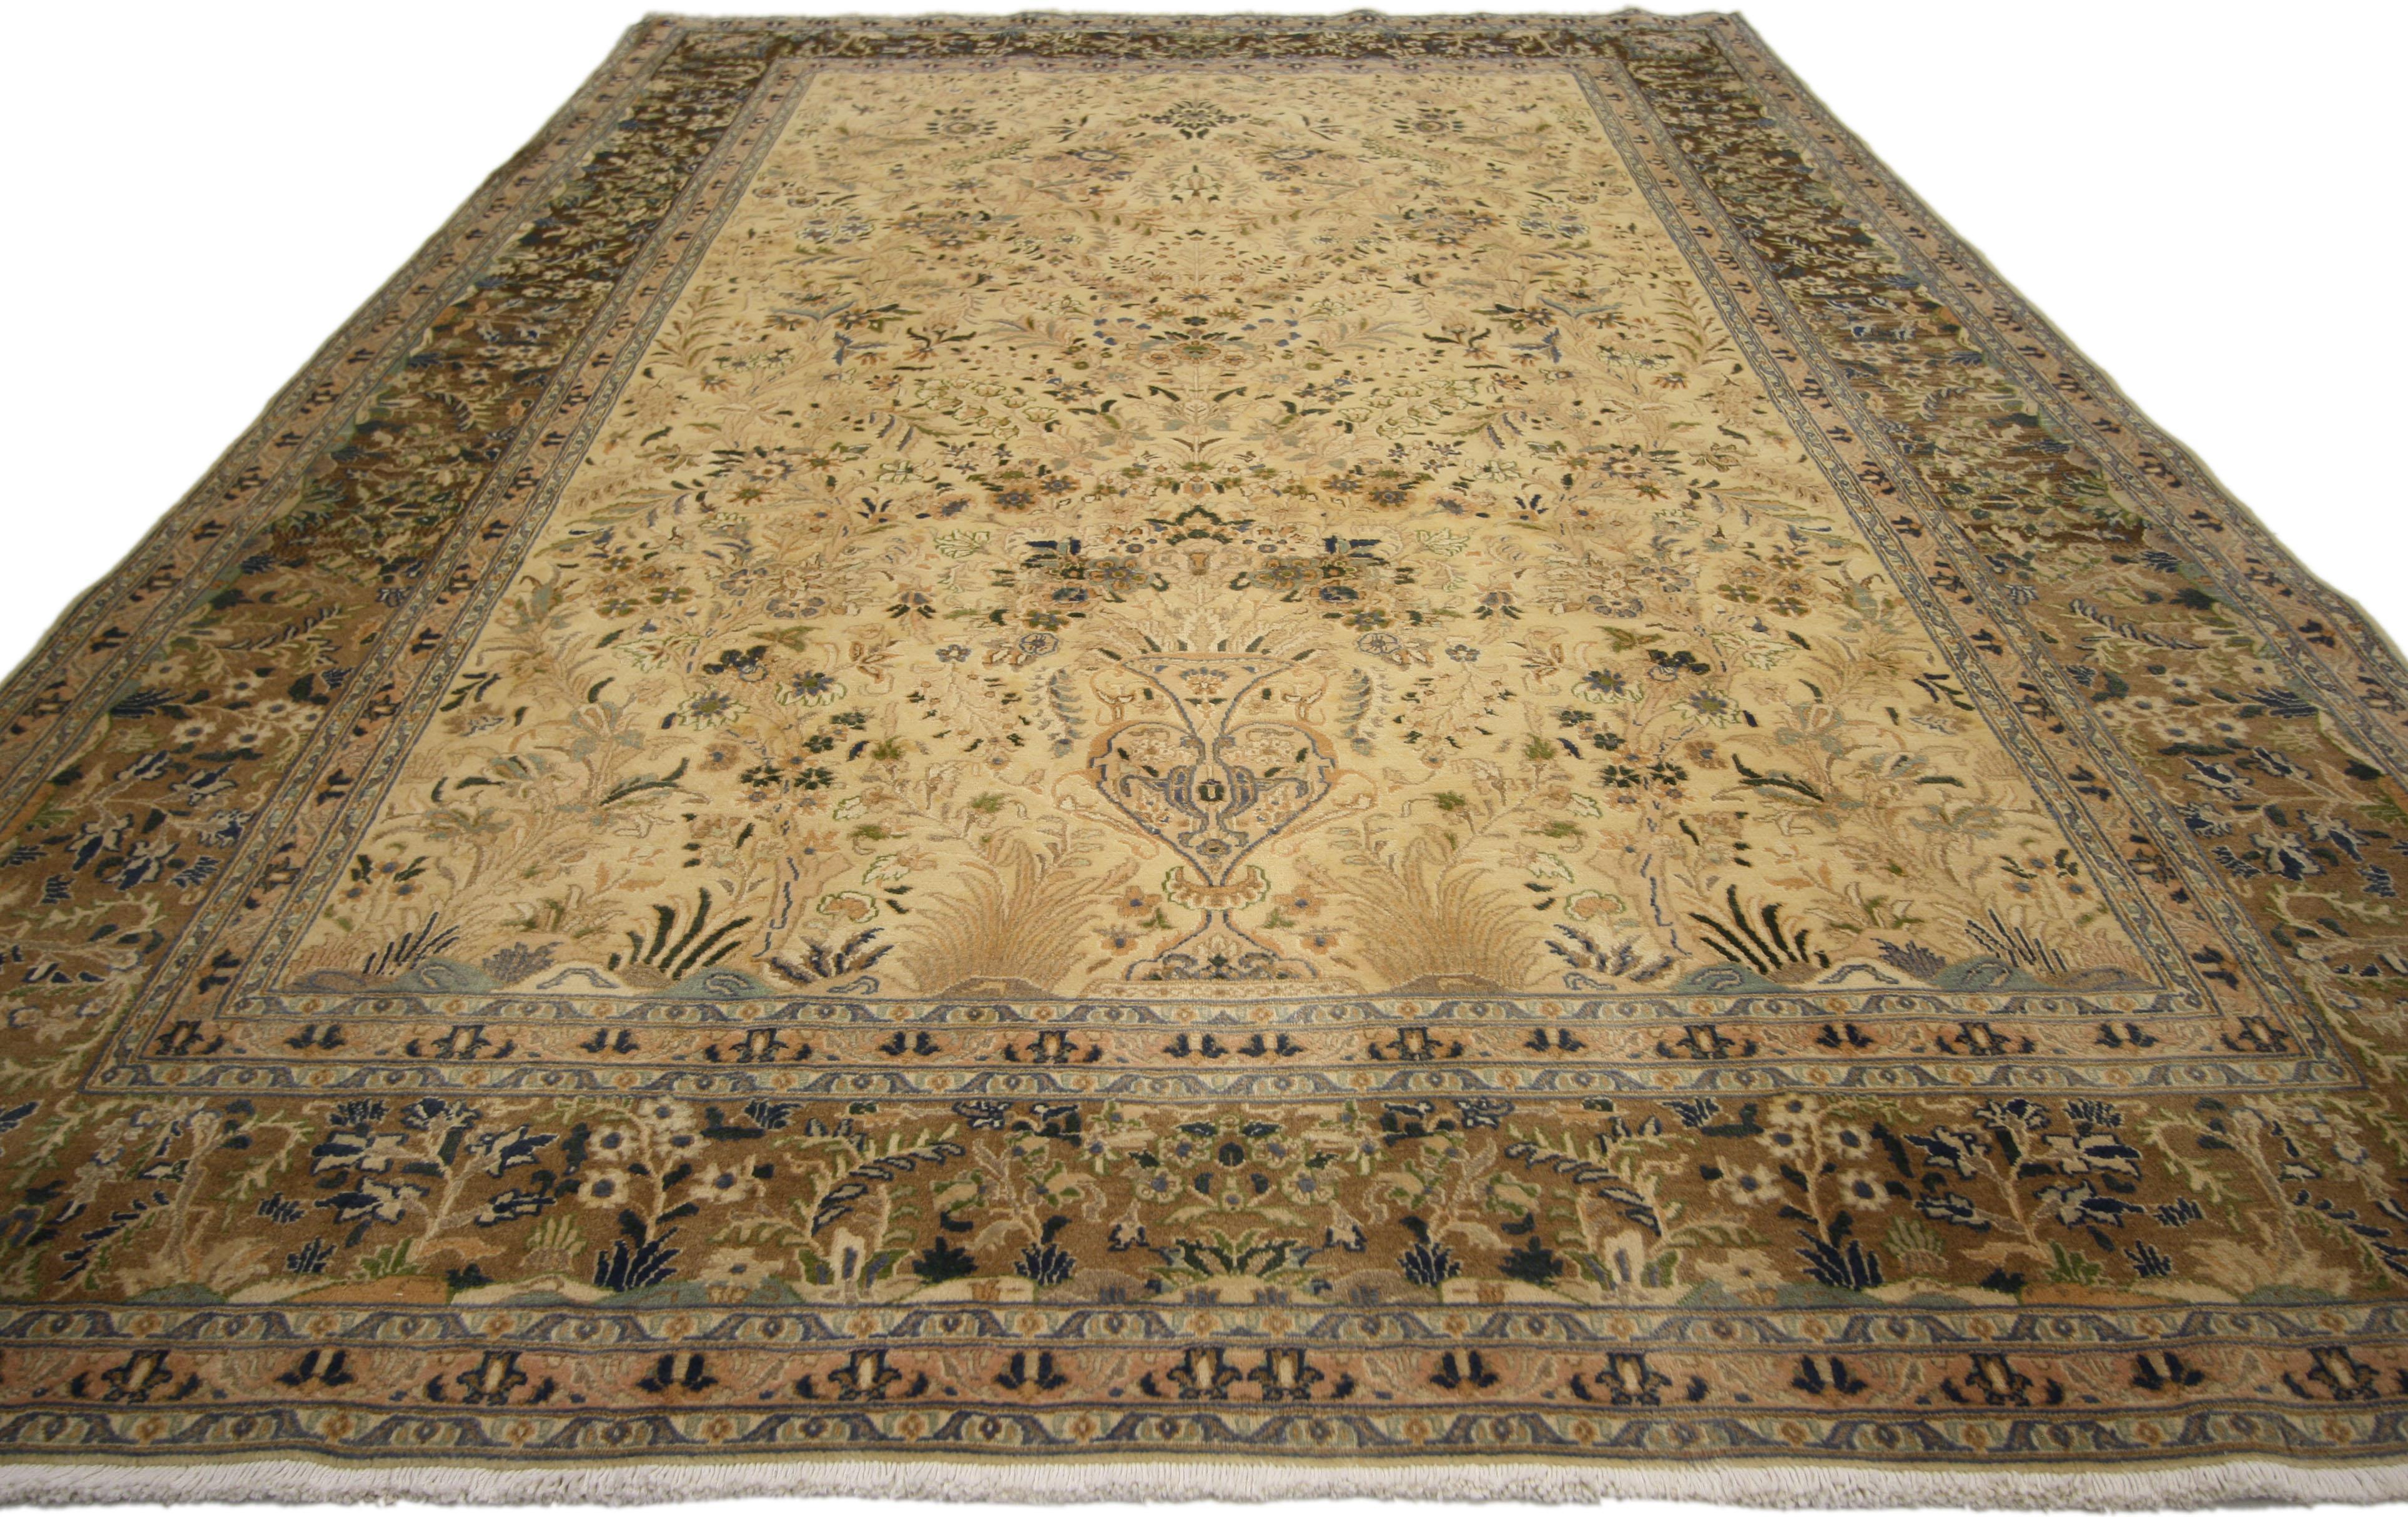 76564, vintage Persian Khorassan area rug with traditional style. Emanating grace and Persian culture, this hand knotted wool vintage Persian Khorassan area rug displays a densely ornamented field with elegant floral sprays throughout. A single vase